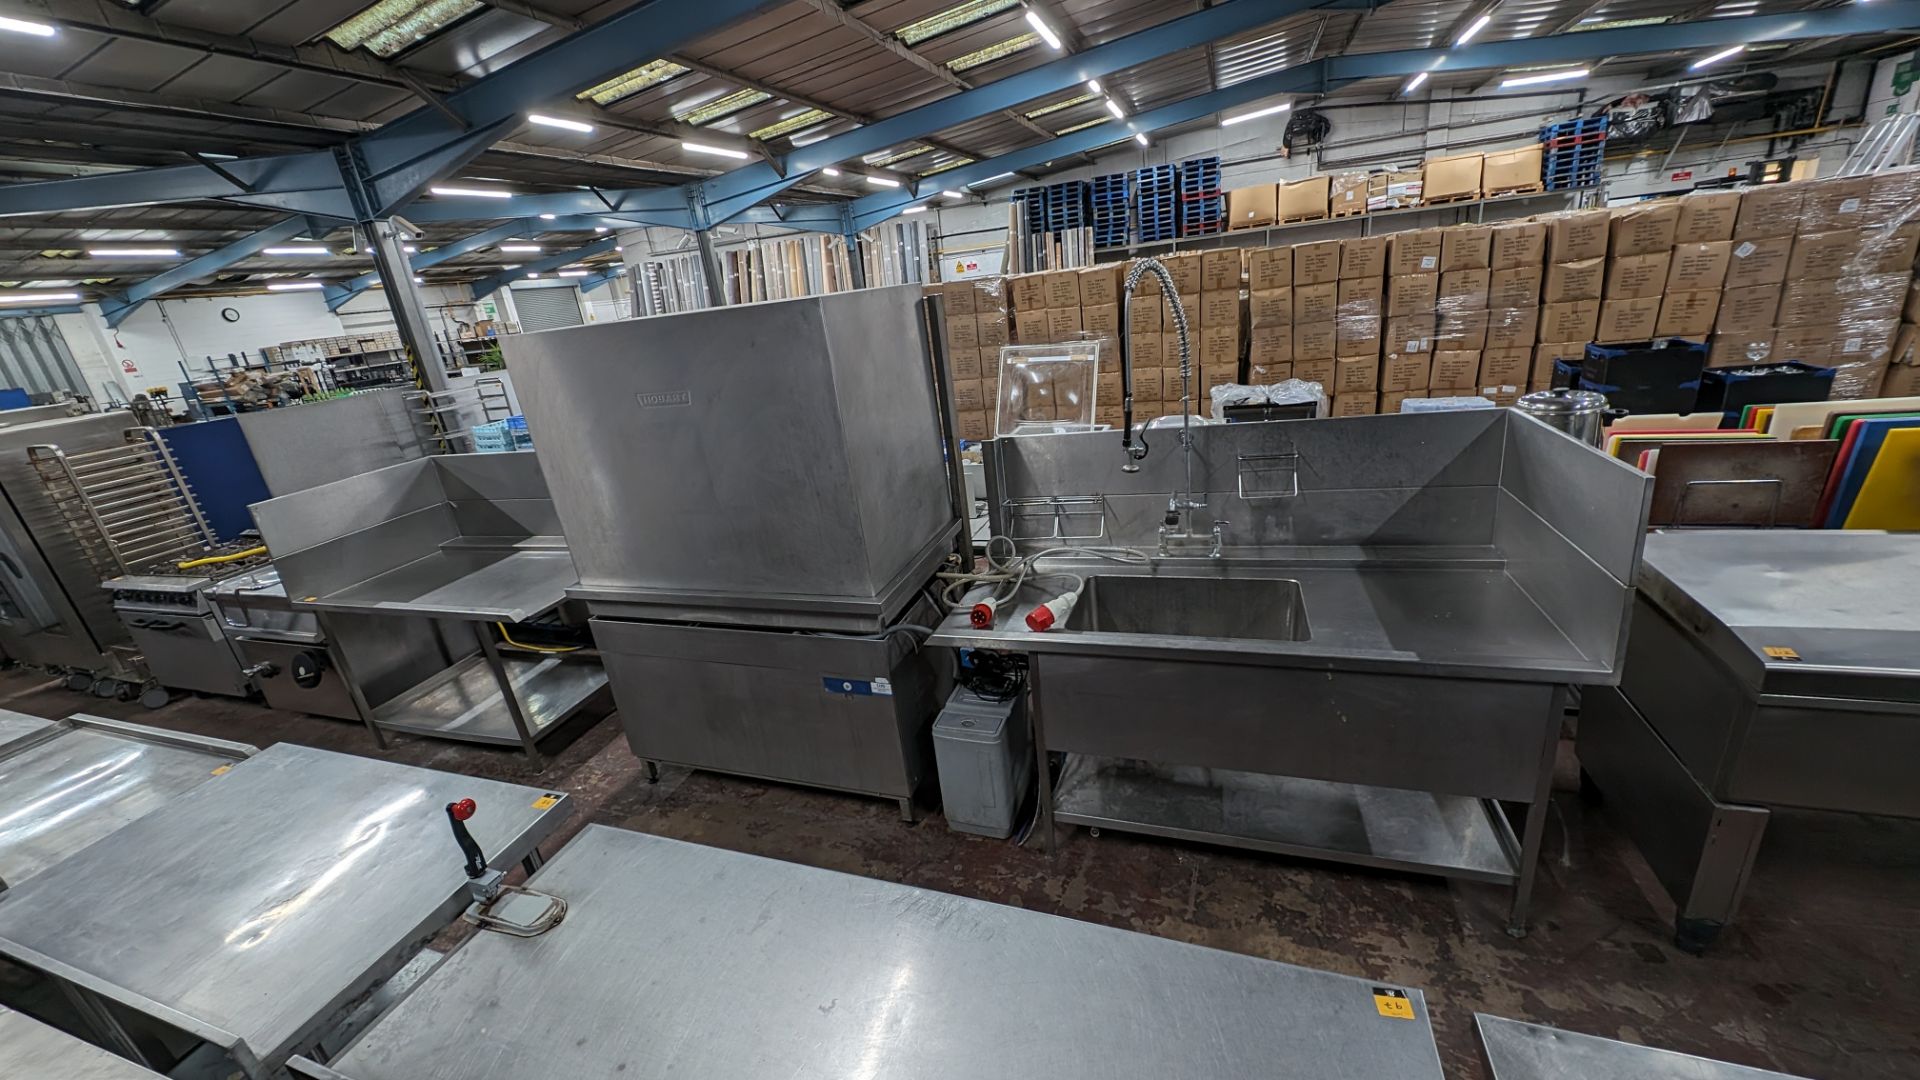 Hobart very large heavy duty commercial pass-through dishwasher including large stainless steel tray - Image 19 of 19